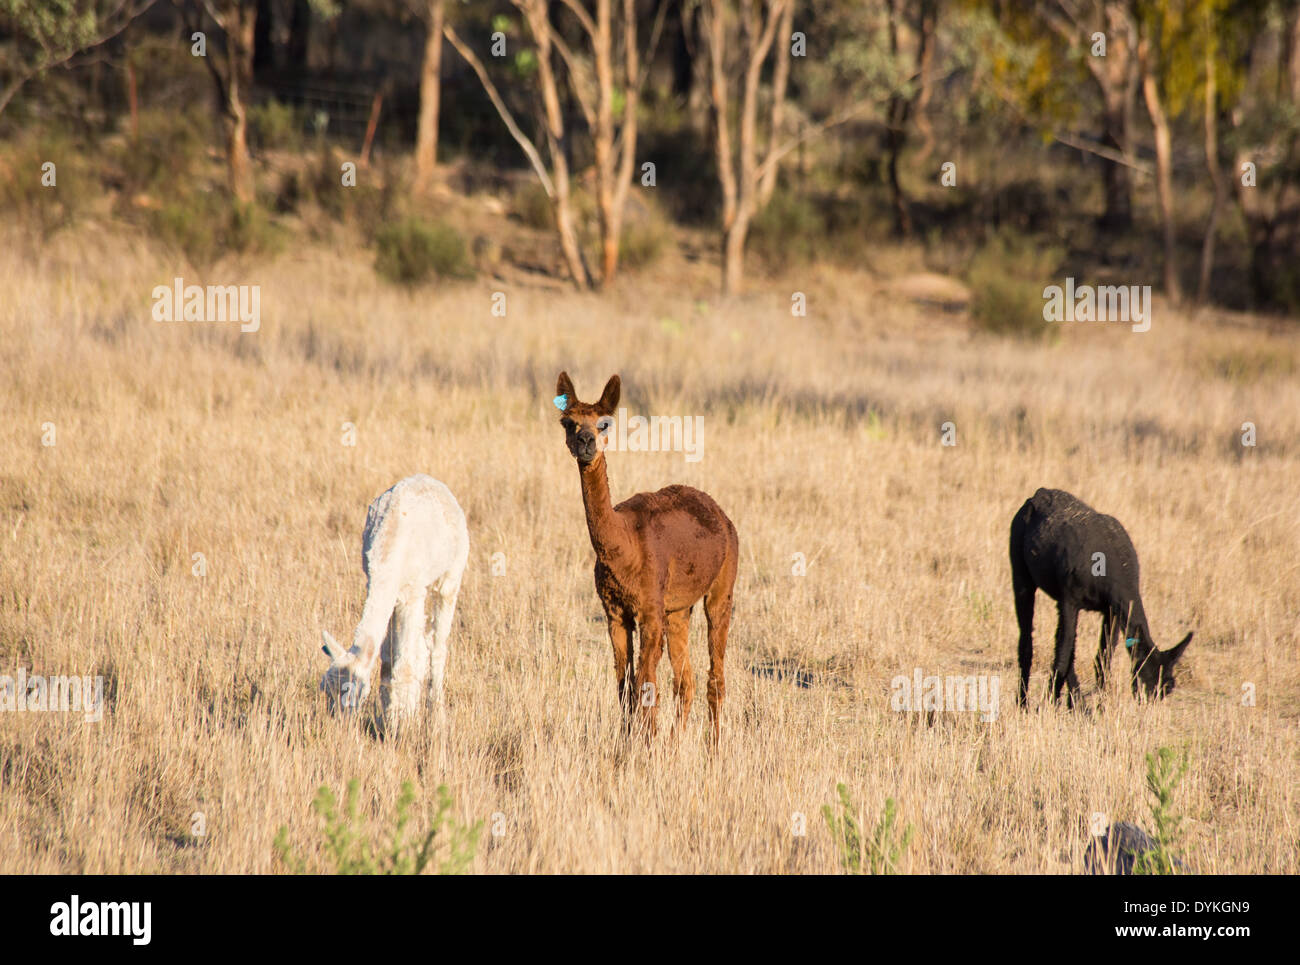 Alpacas, Vicugna pacos, grazing on a farm in New South Wales, Australia Stock Photo